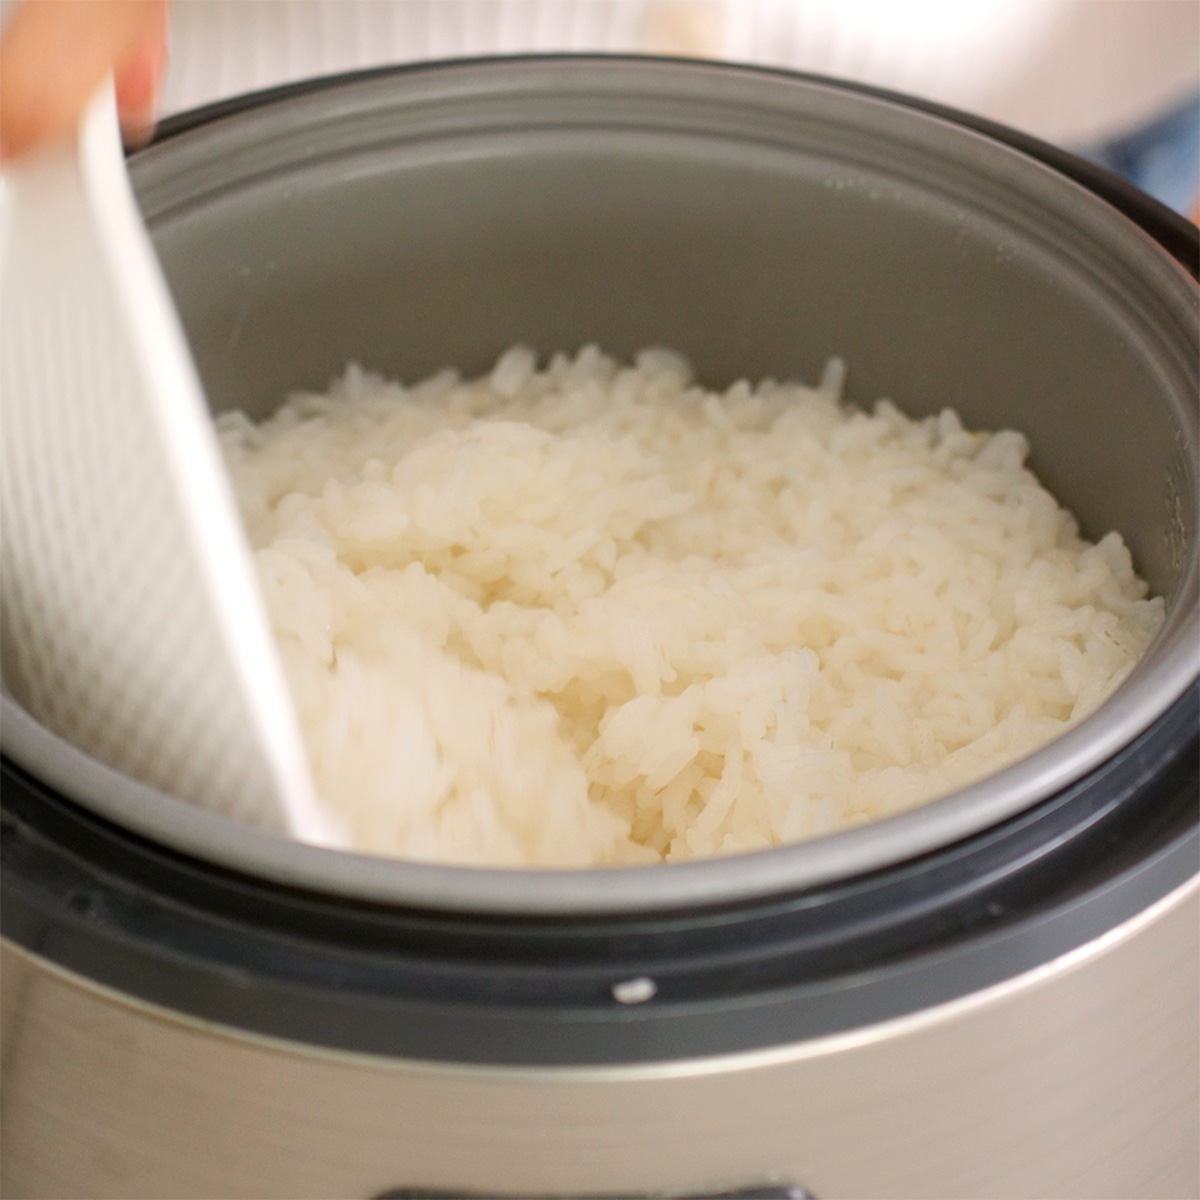 Fluffing cooked sushi rice inside of a rice cooker.